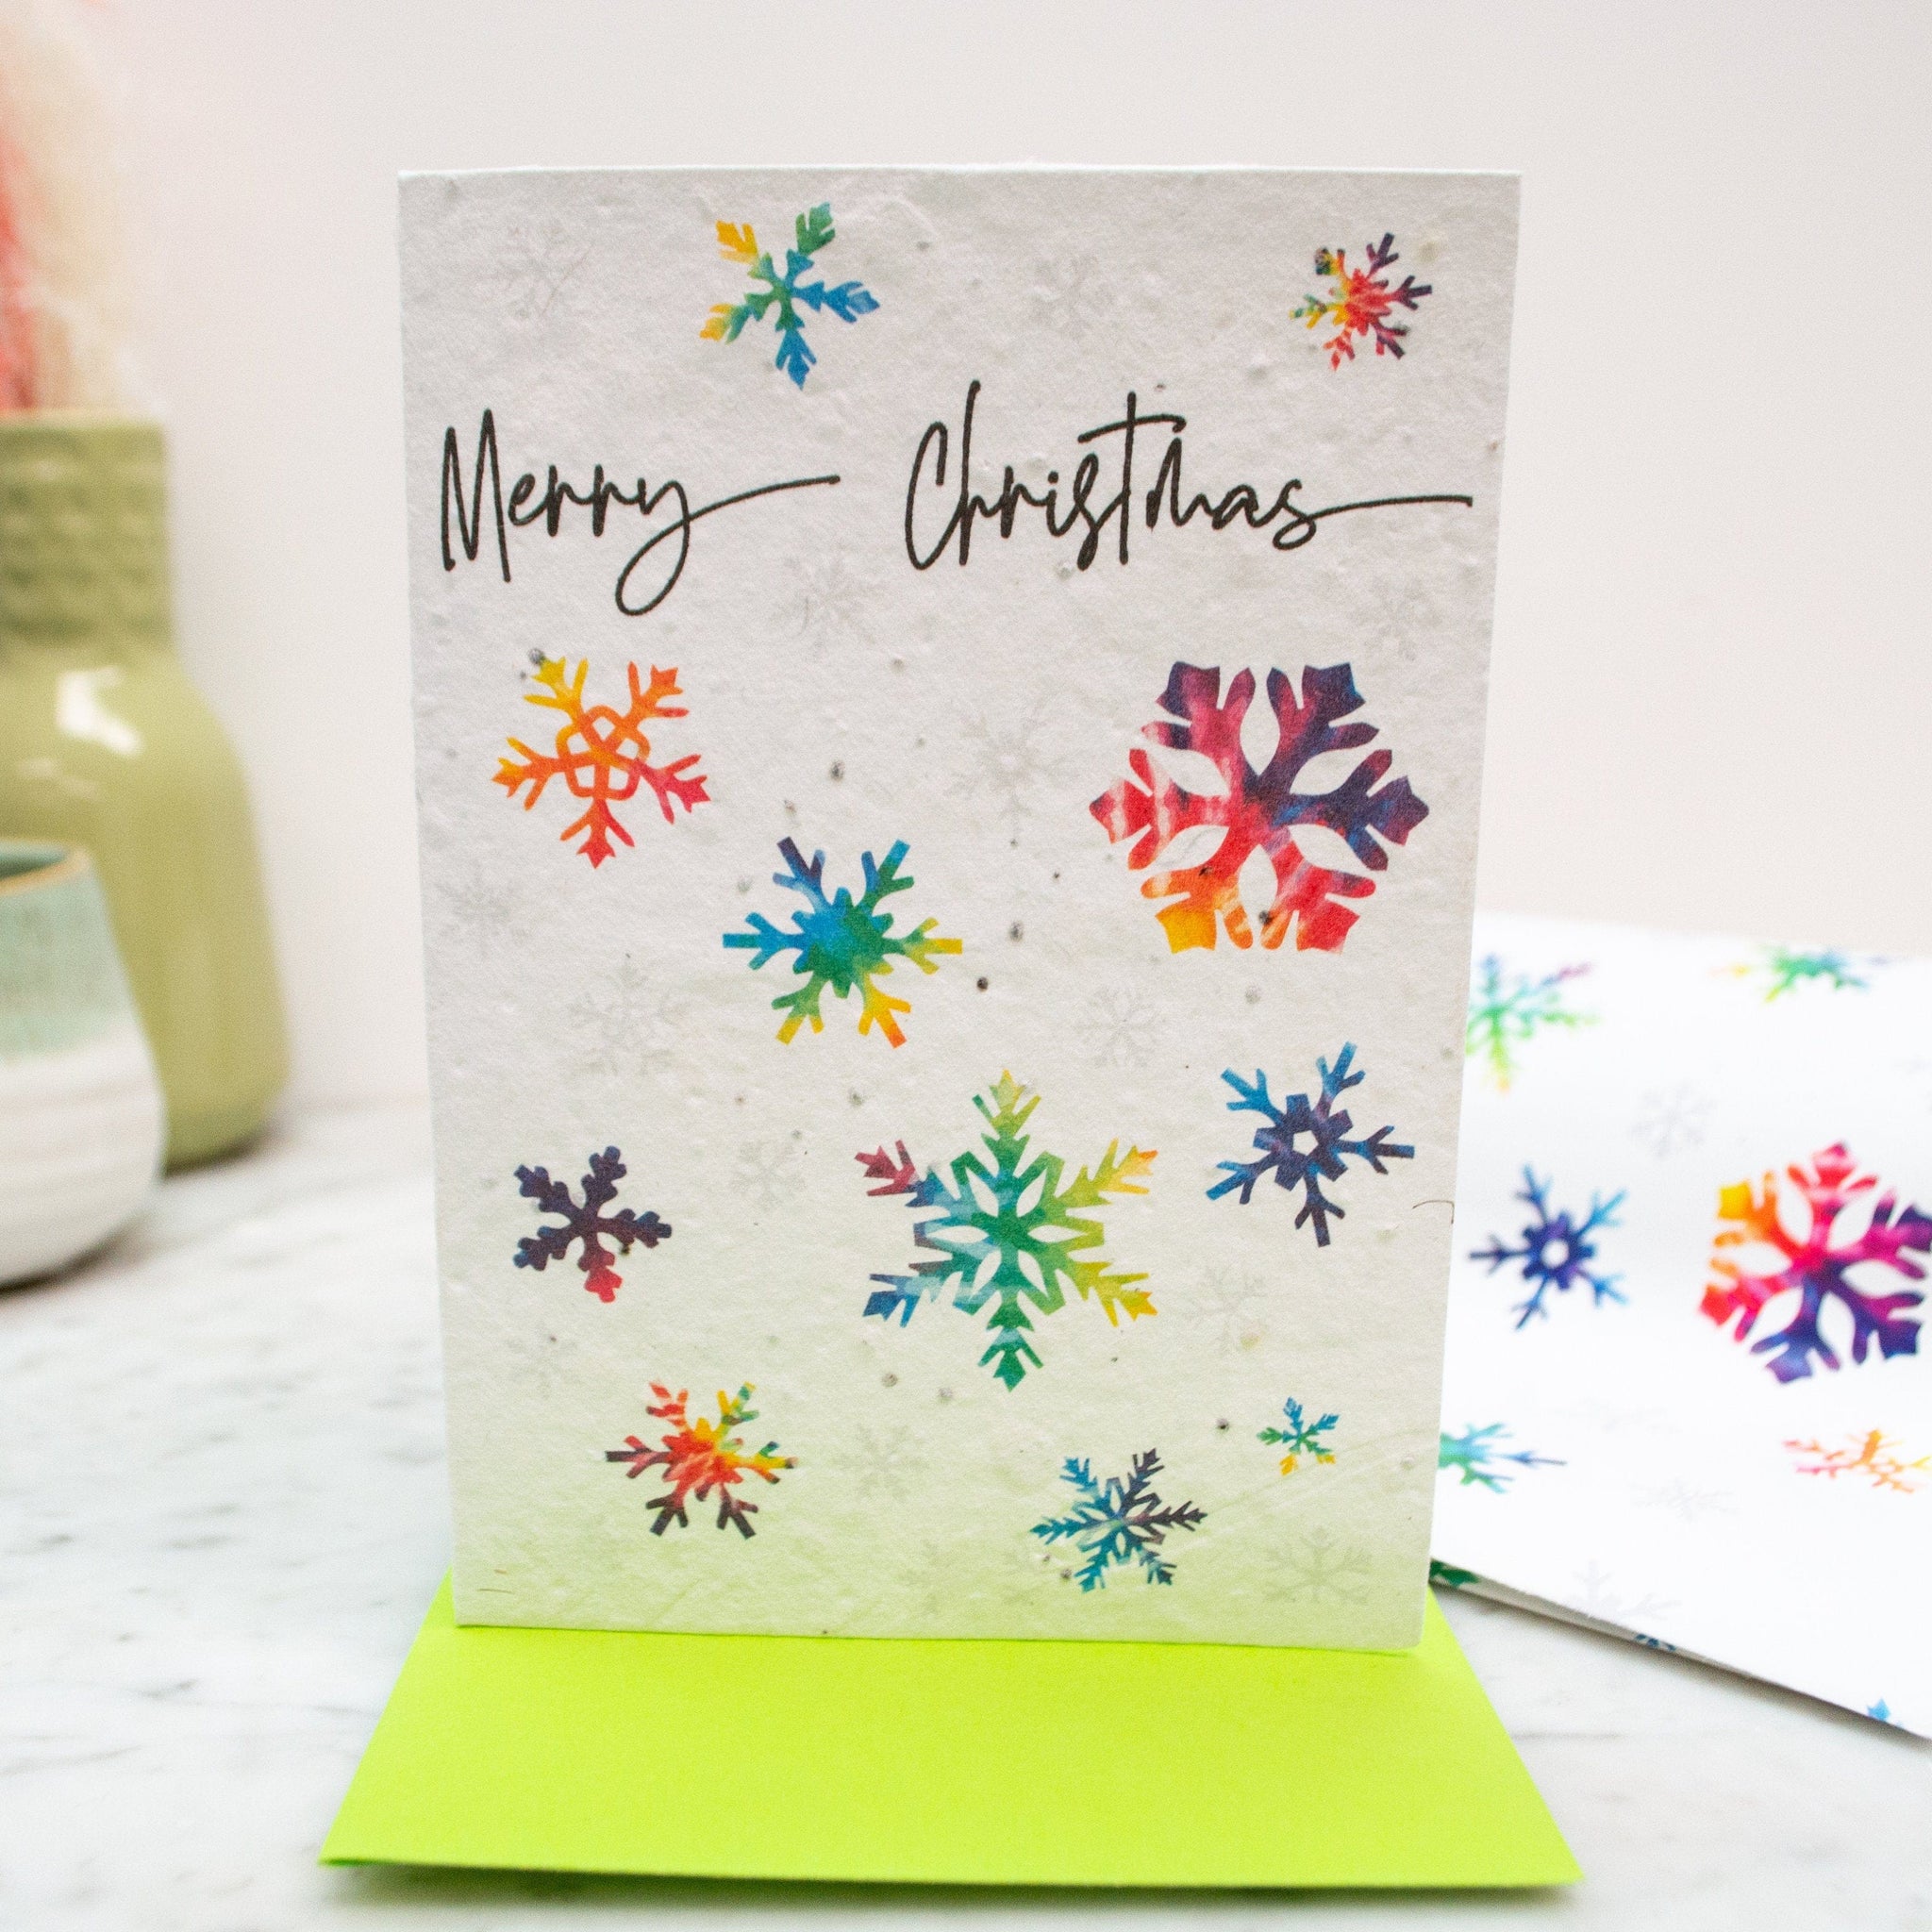 Greenfield Plantable / Recycled Seed Paper and Cards